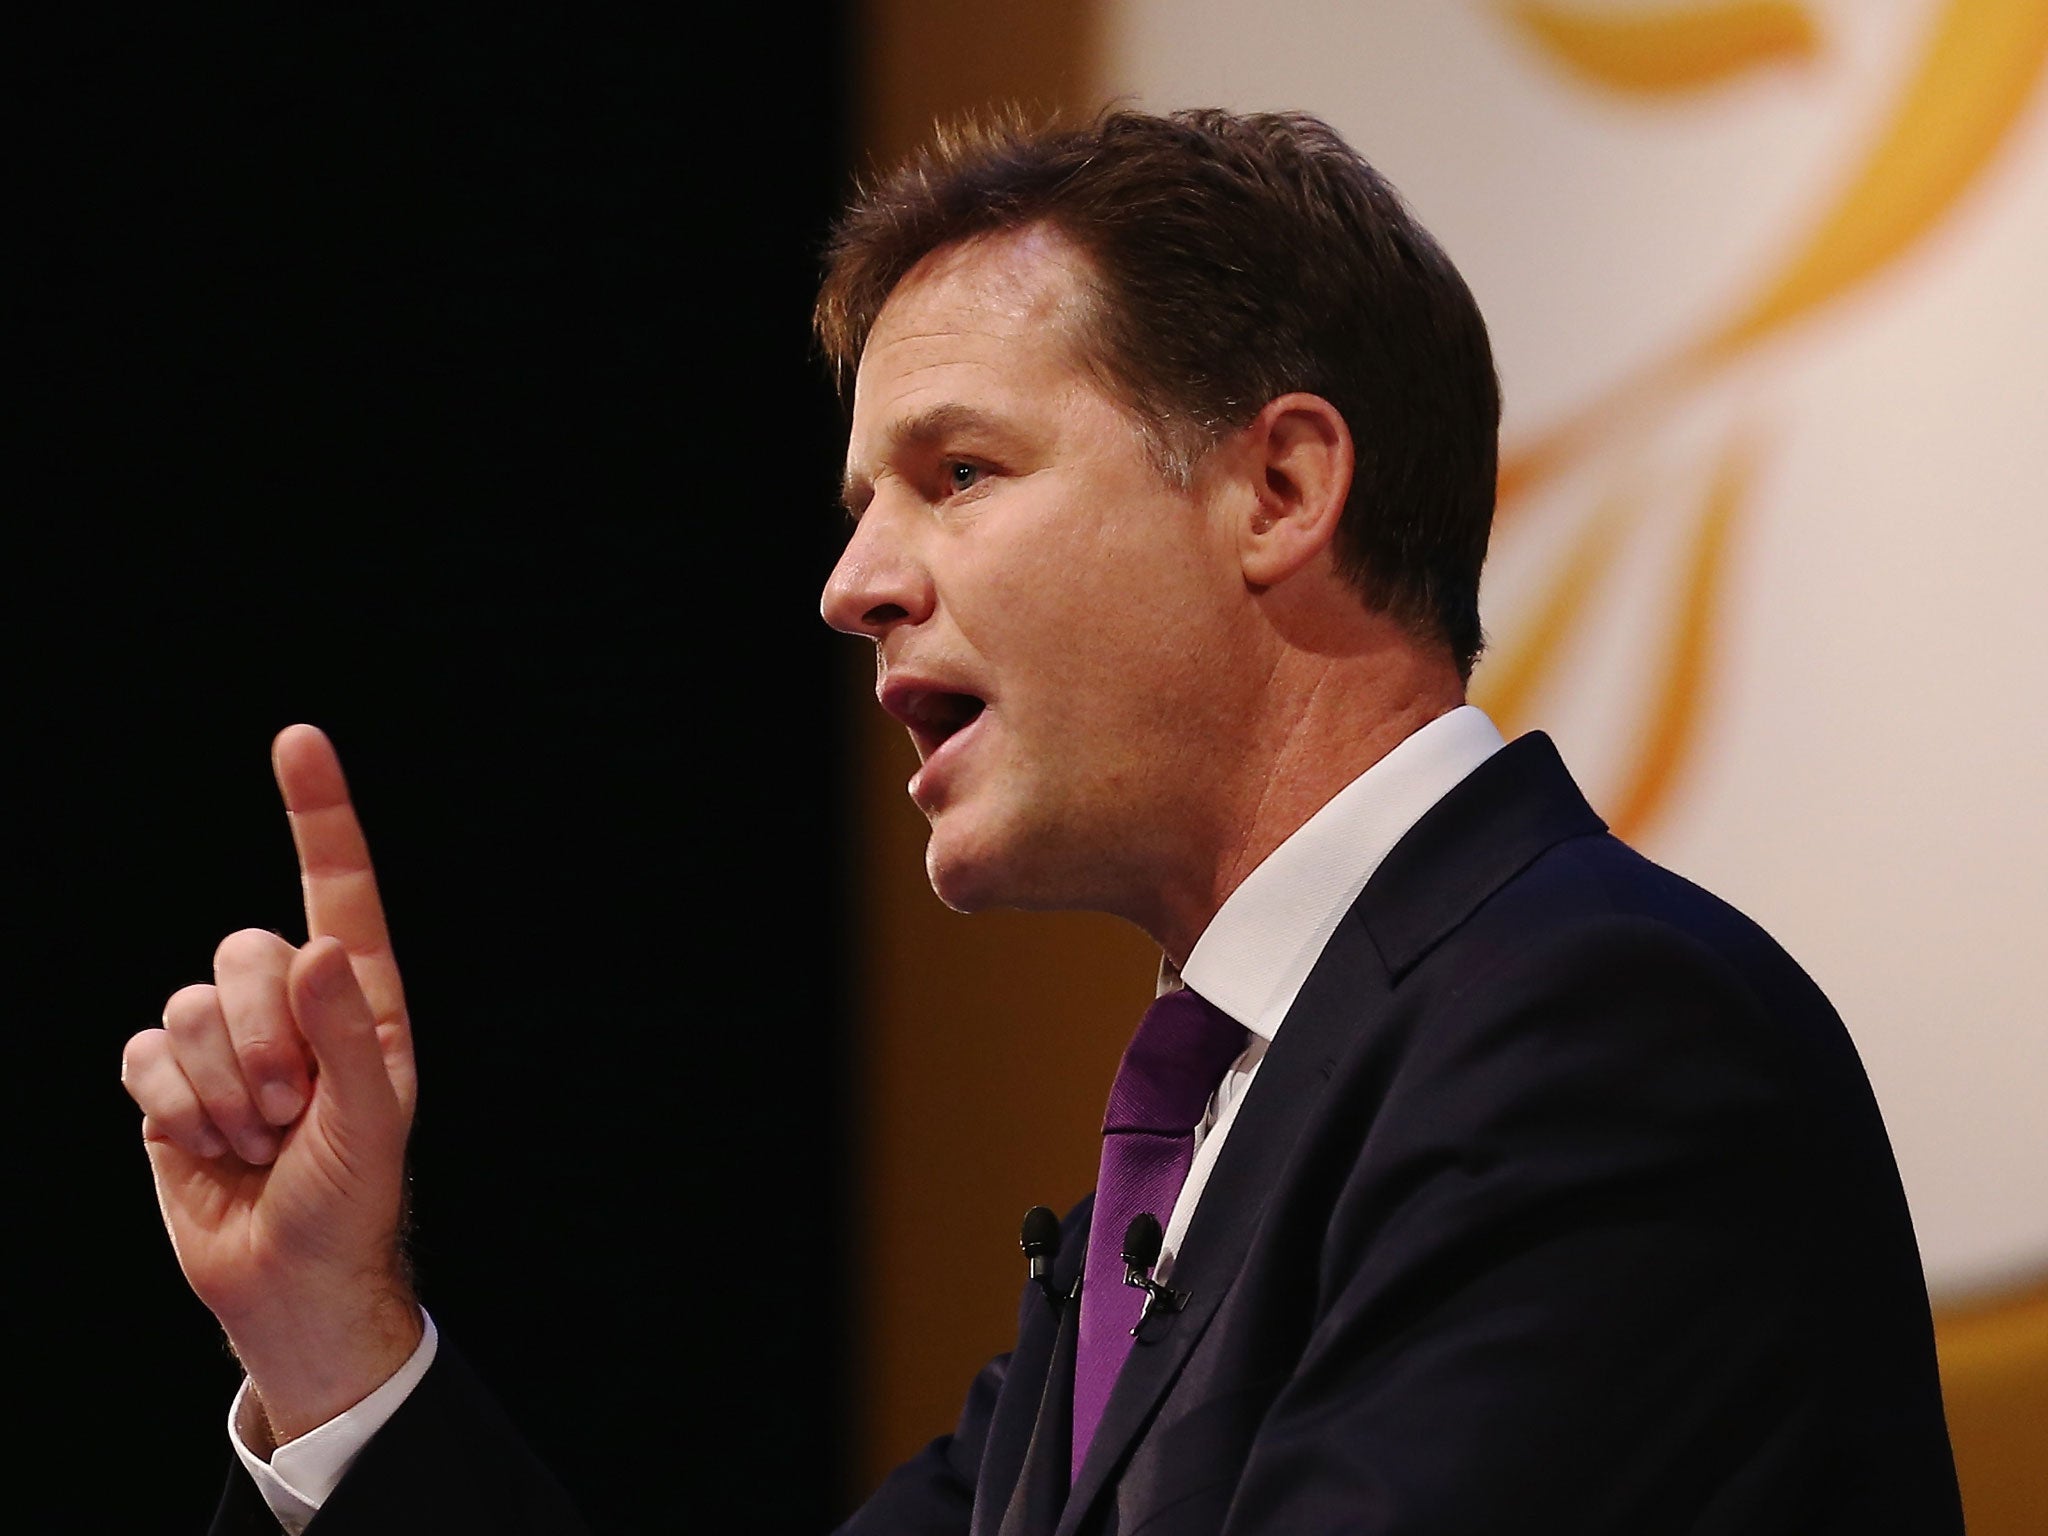 'The best analysis of the free-school-meals policy came from Mark Pack, the Lib Dem blogger: 'The Lib Dems may not be promising motherhood, but they are promising apple pie.''